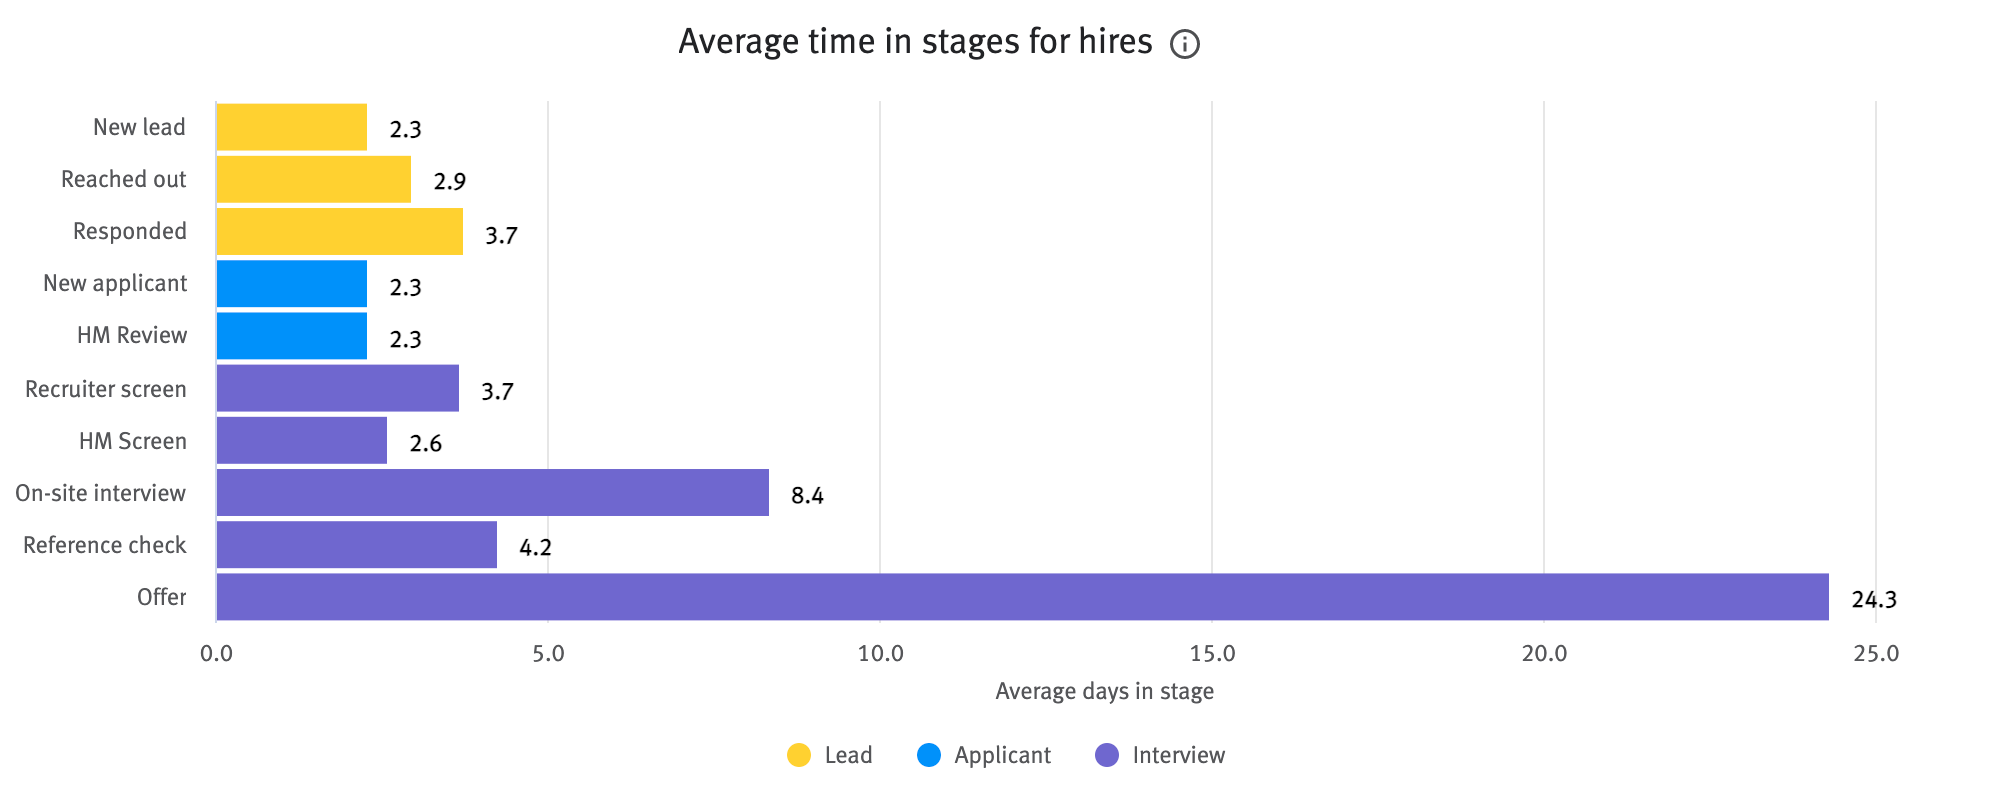 Average time in stages for hires chart